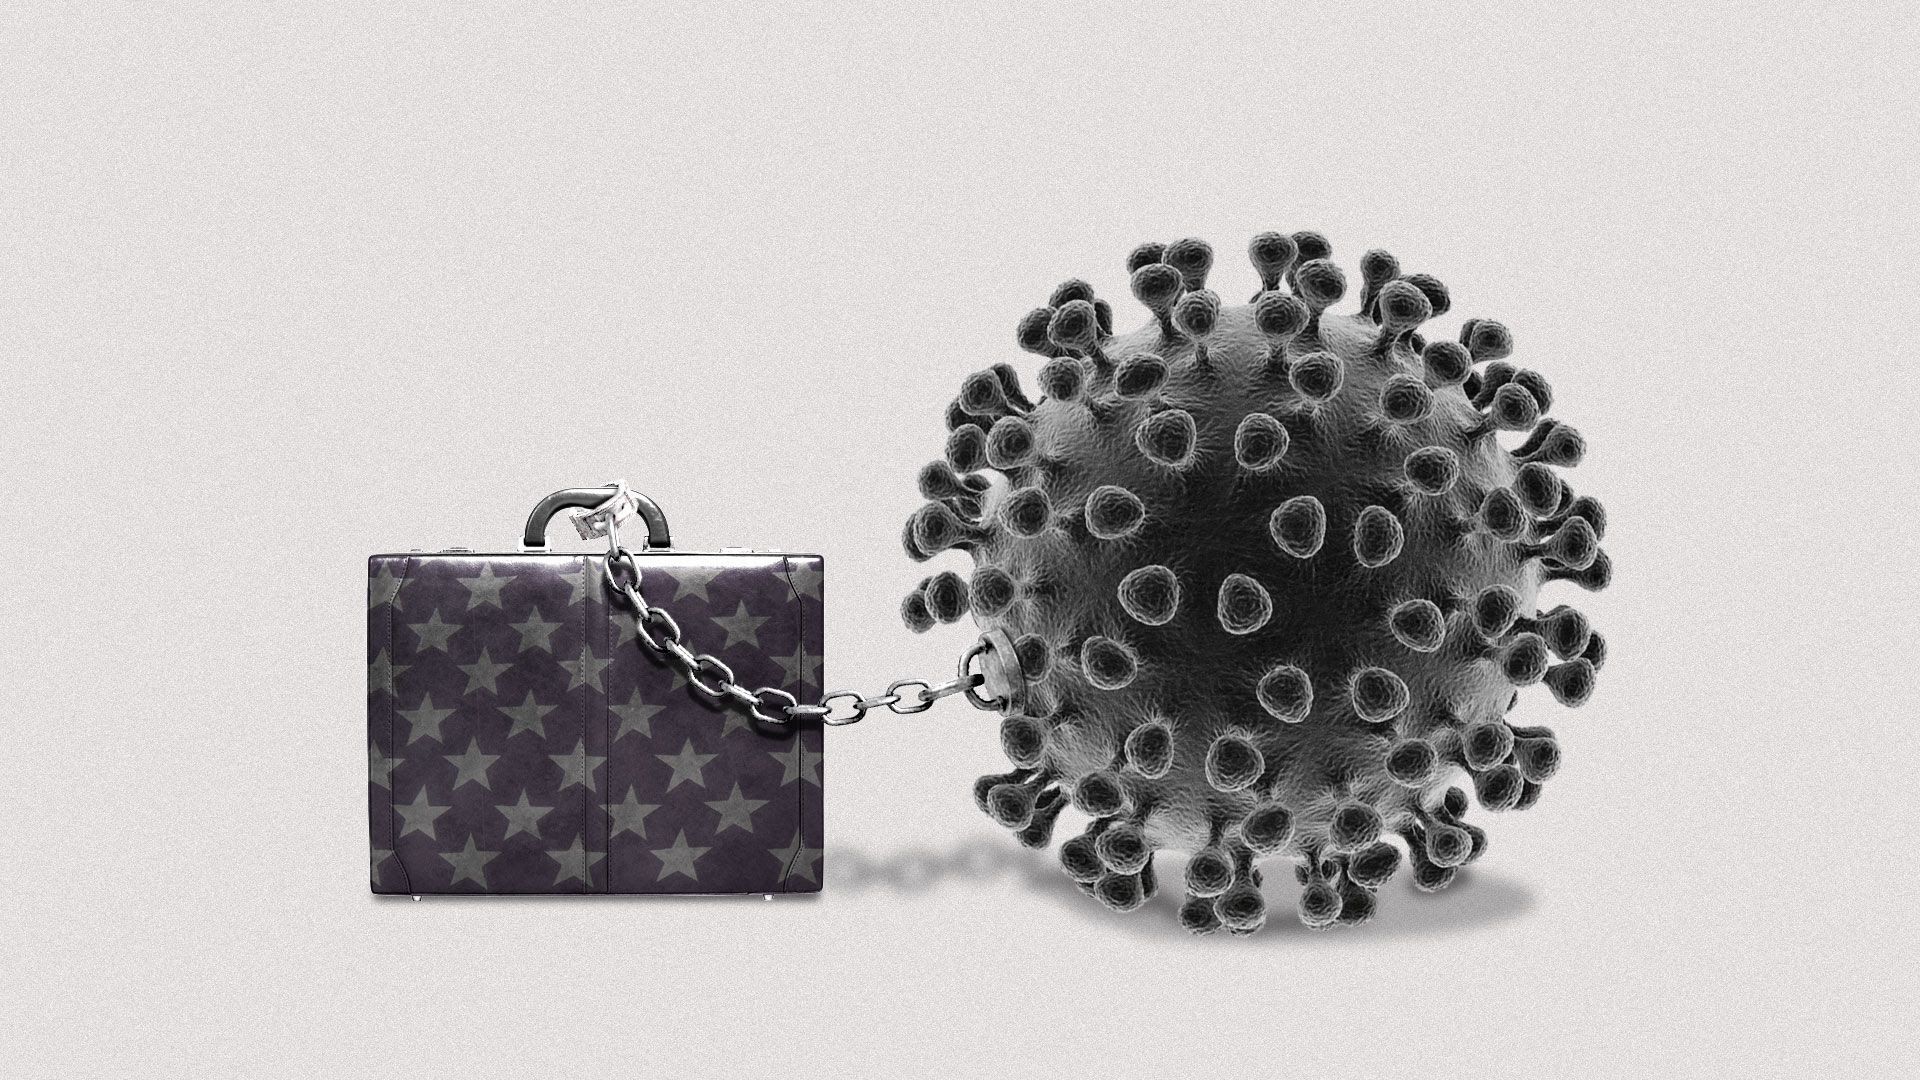 Illustration of a virus cell cuffed to a briefcase